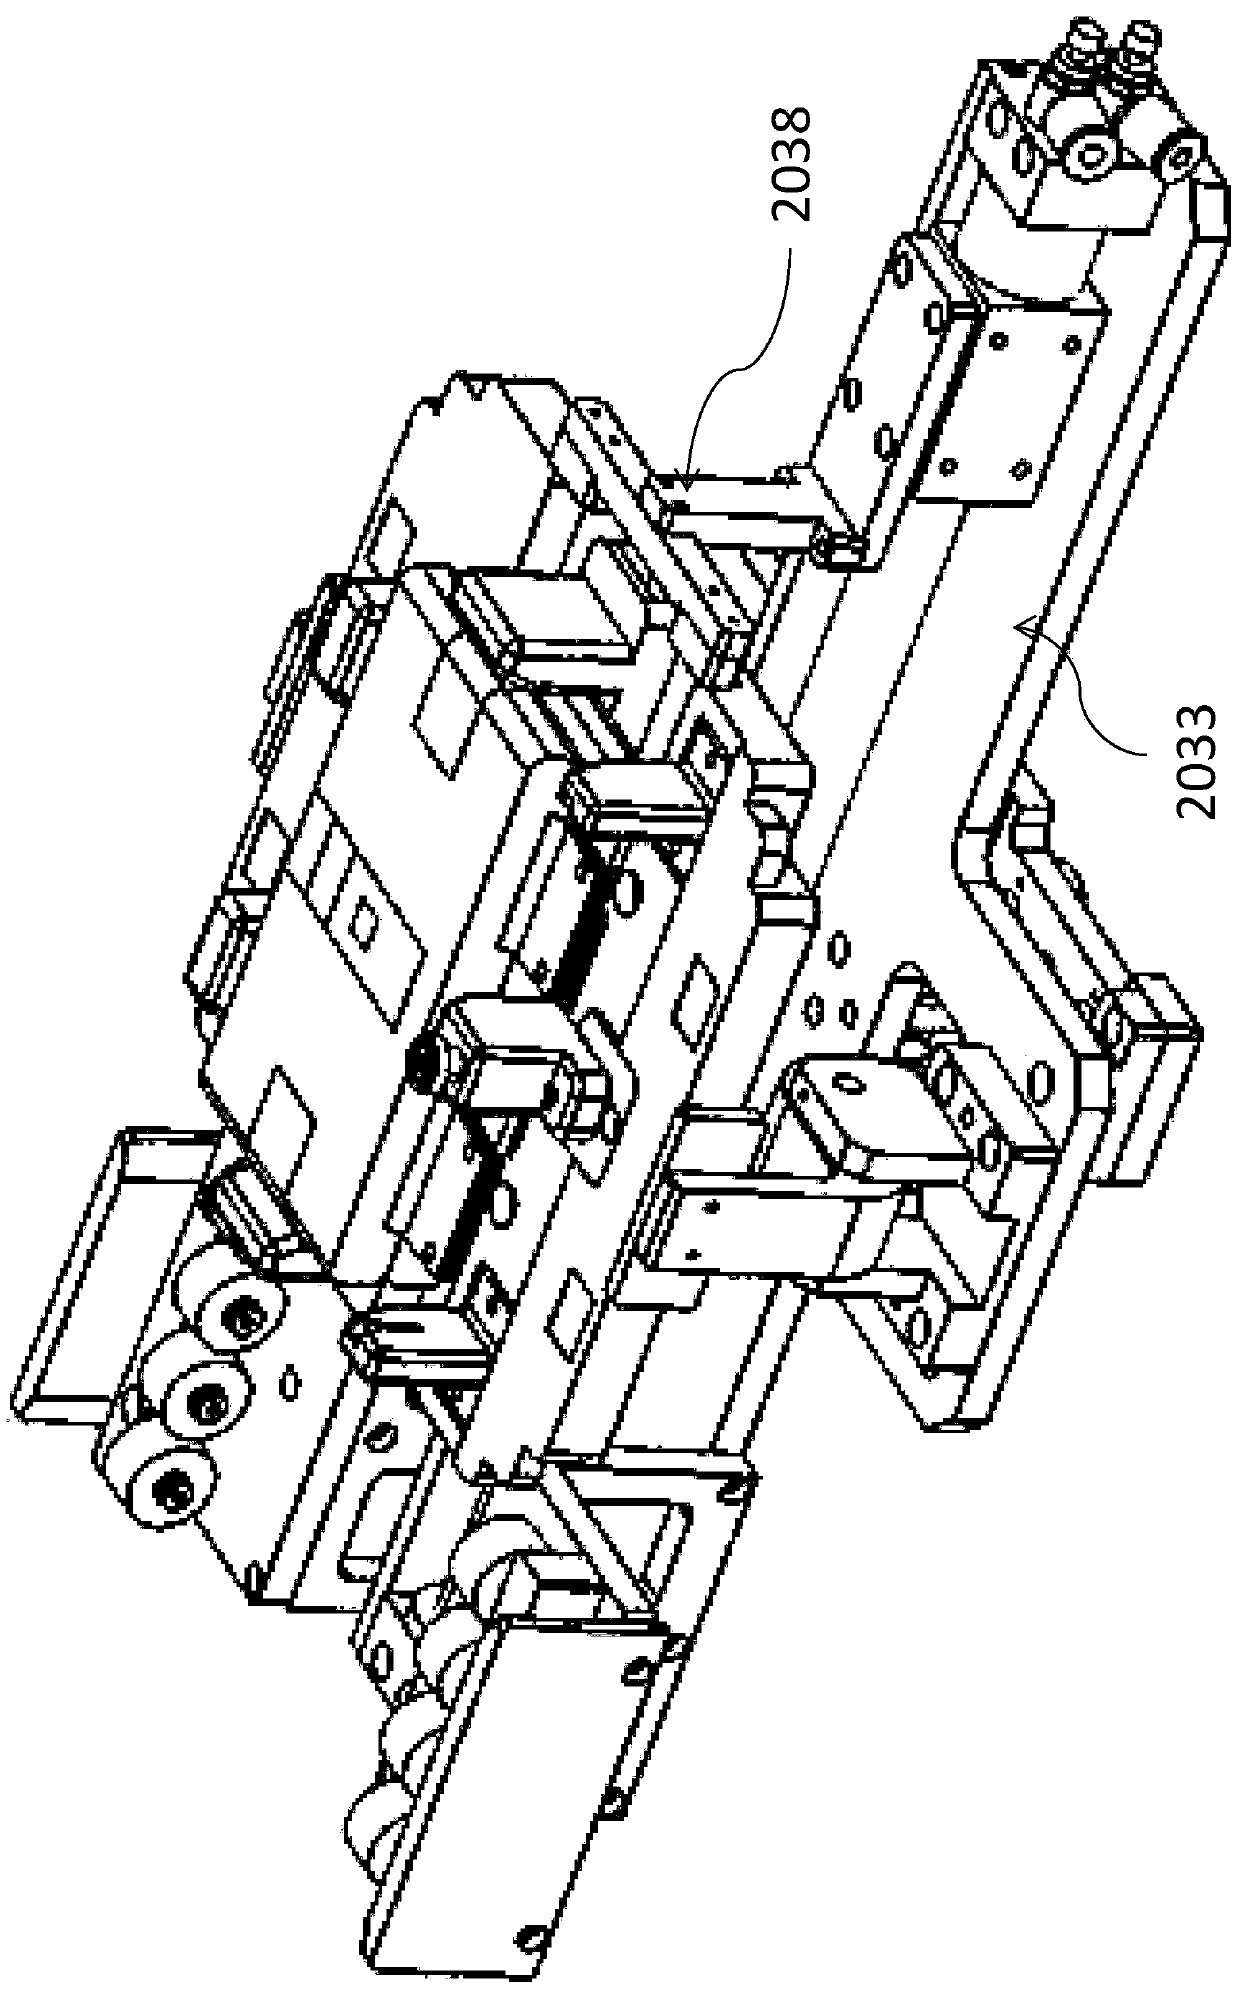 Automatic paring equipment of battery cells